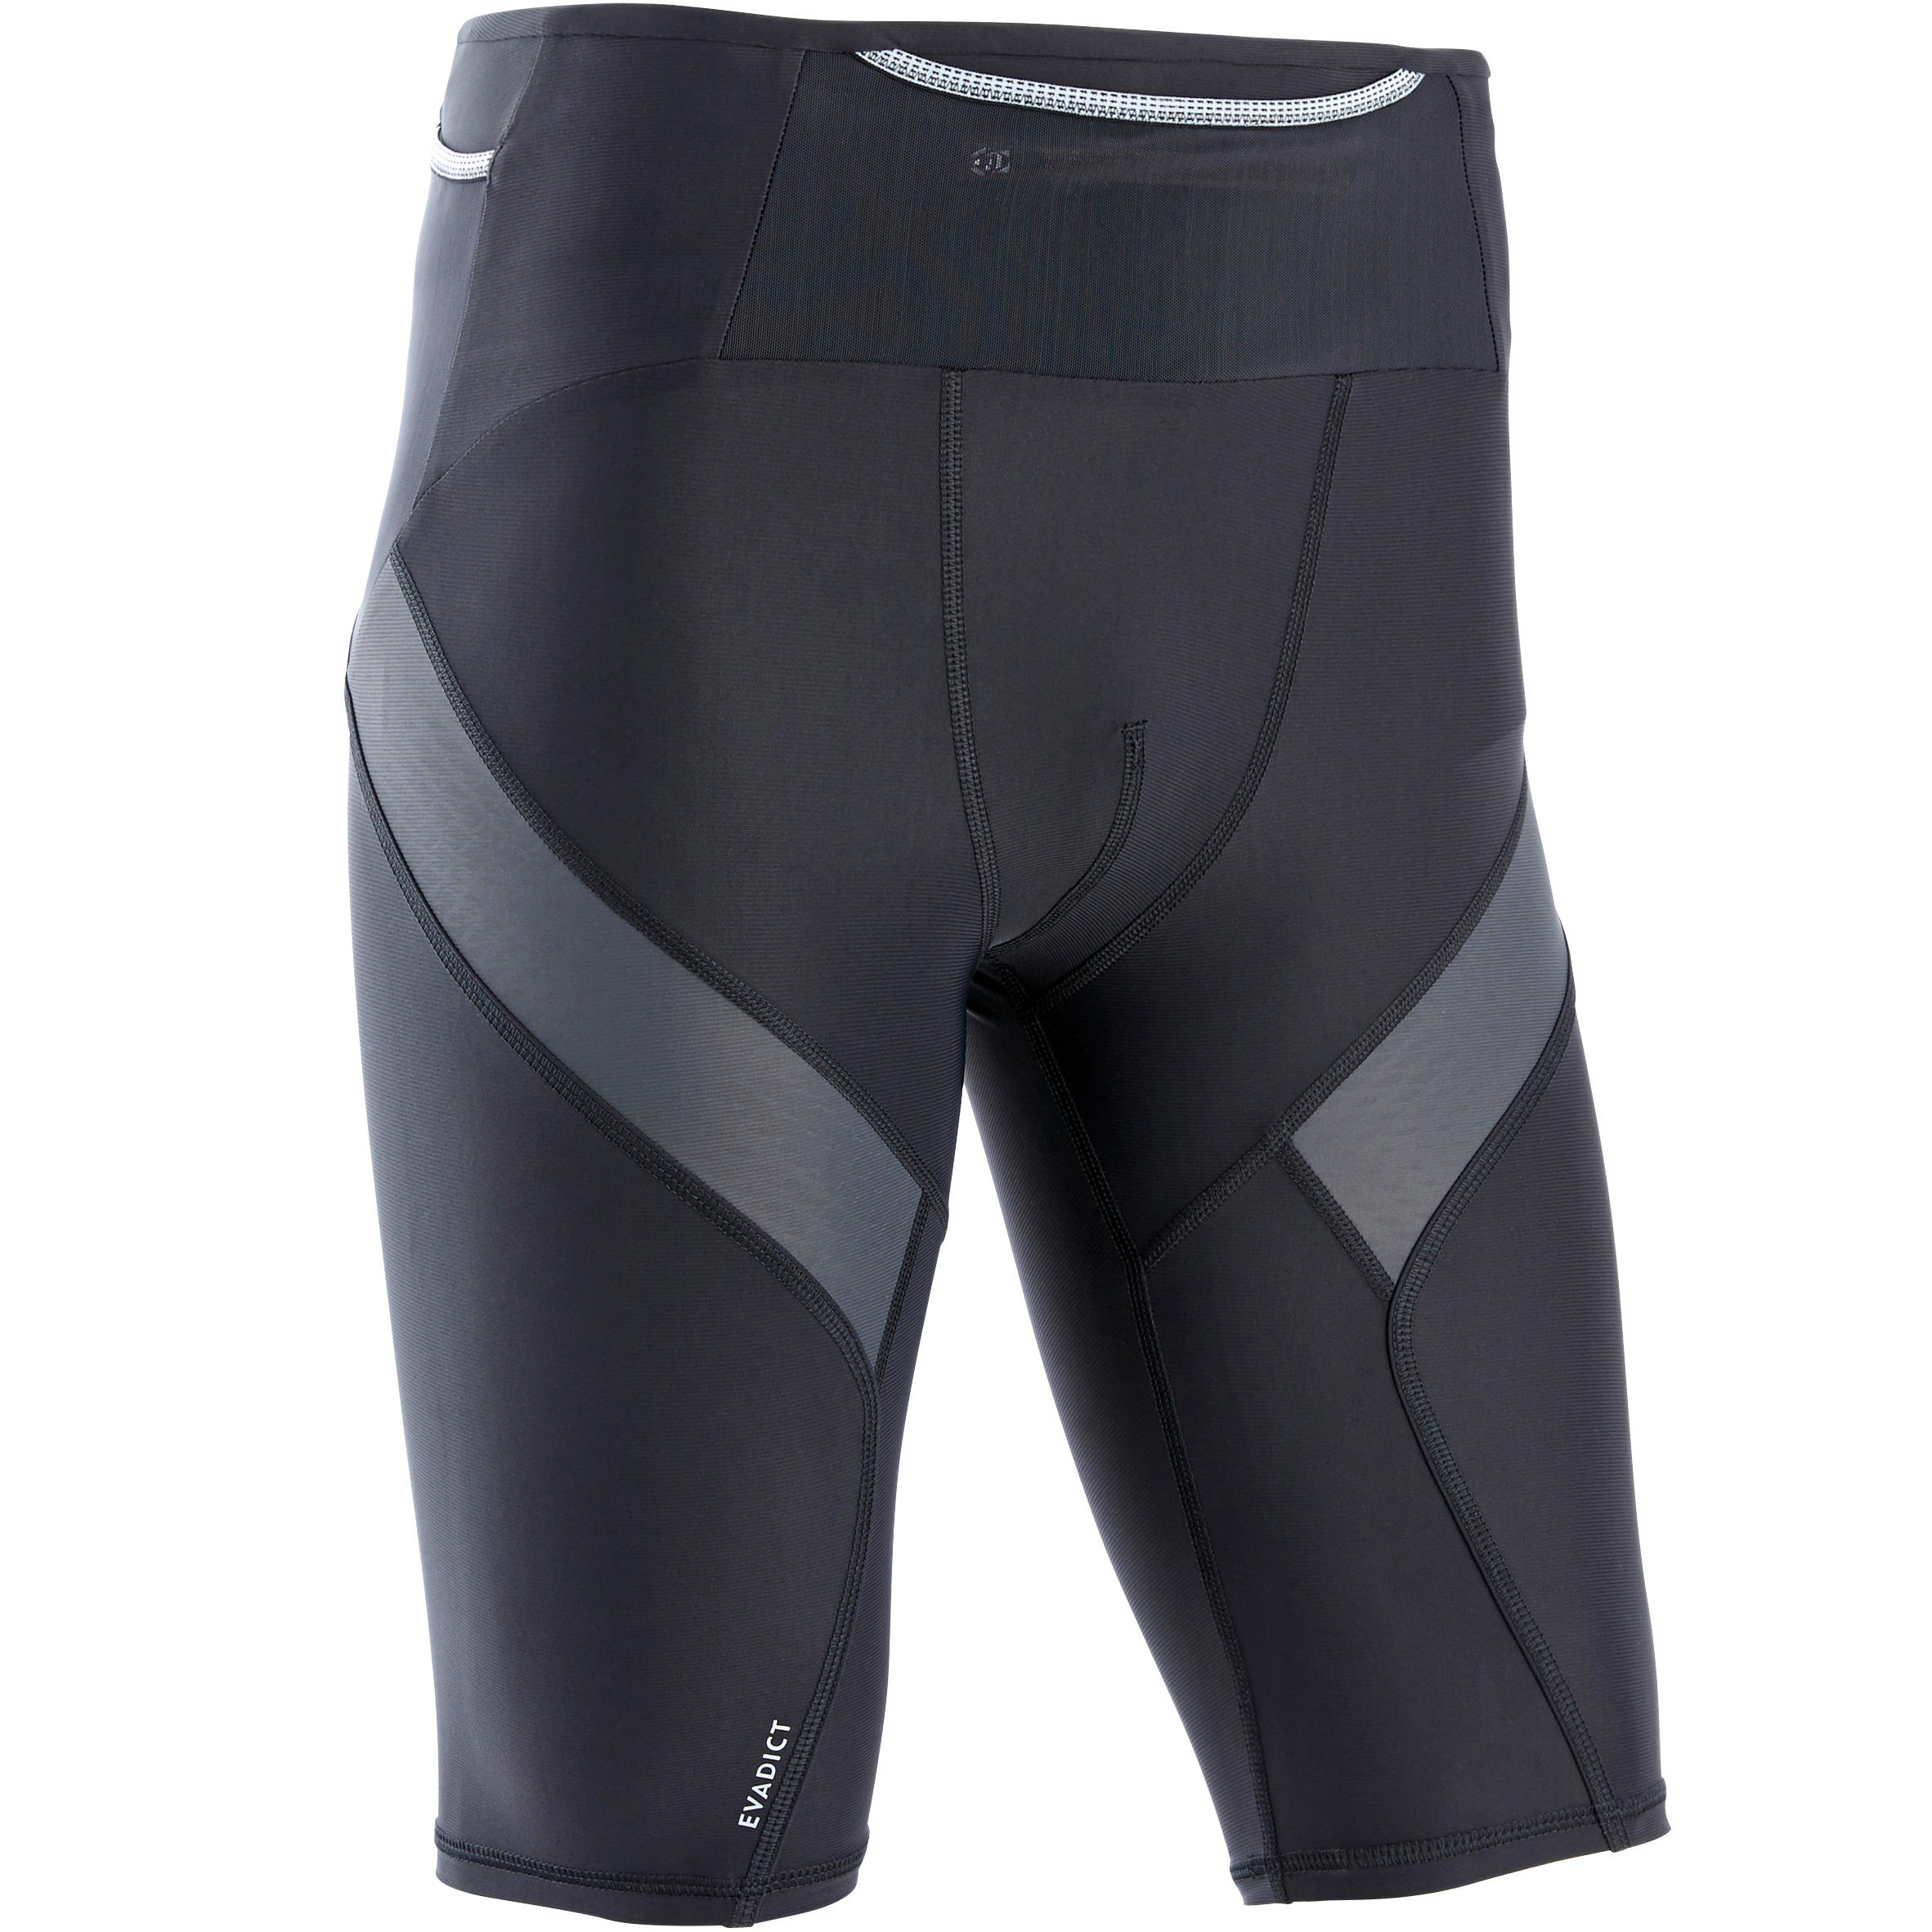 Trail Running Shorts And Tights - Decathlon